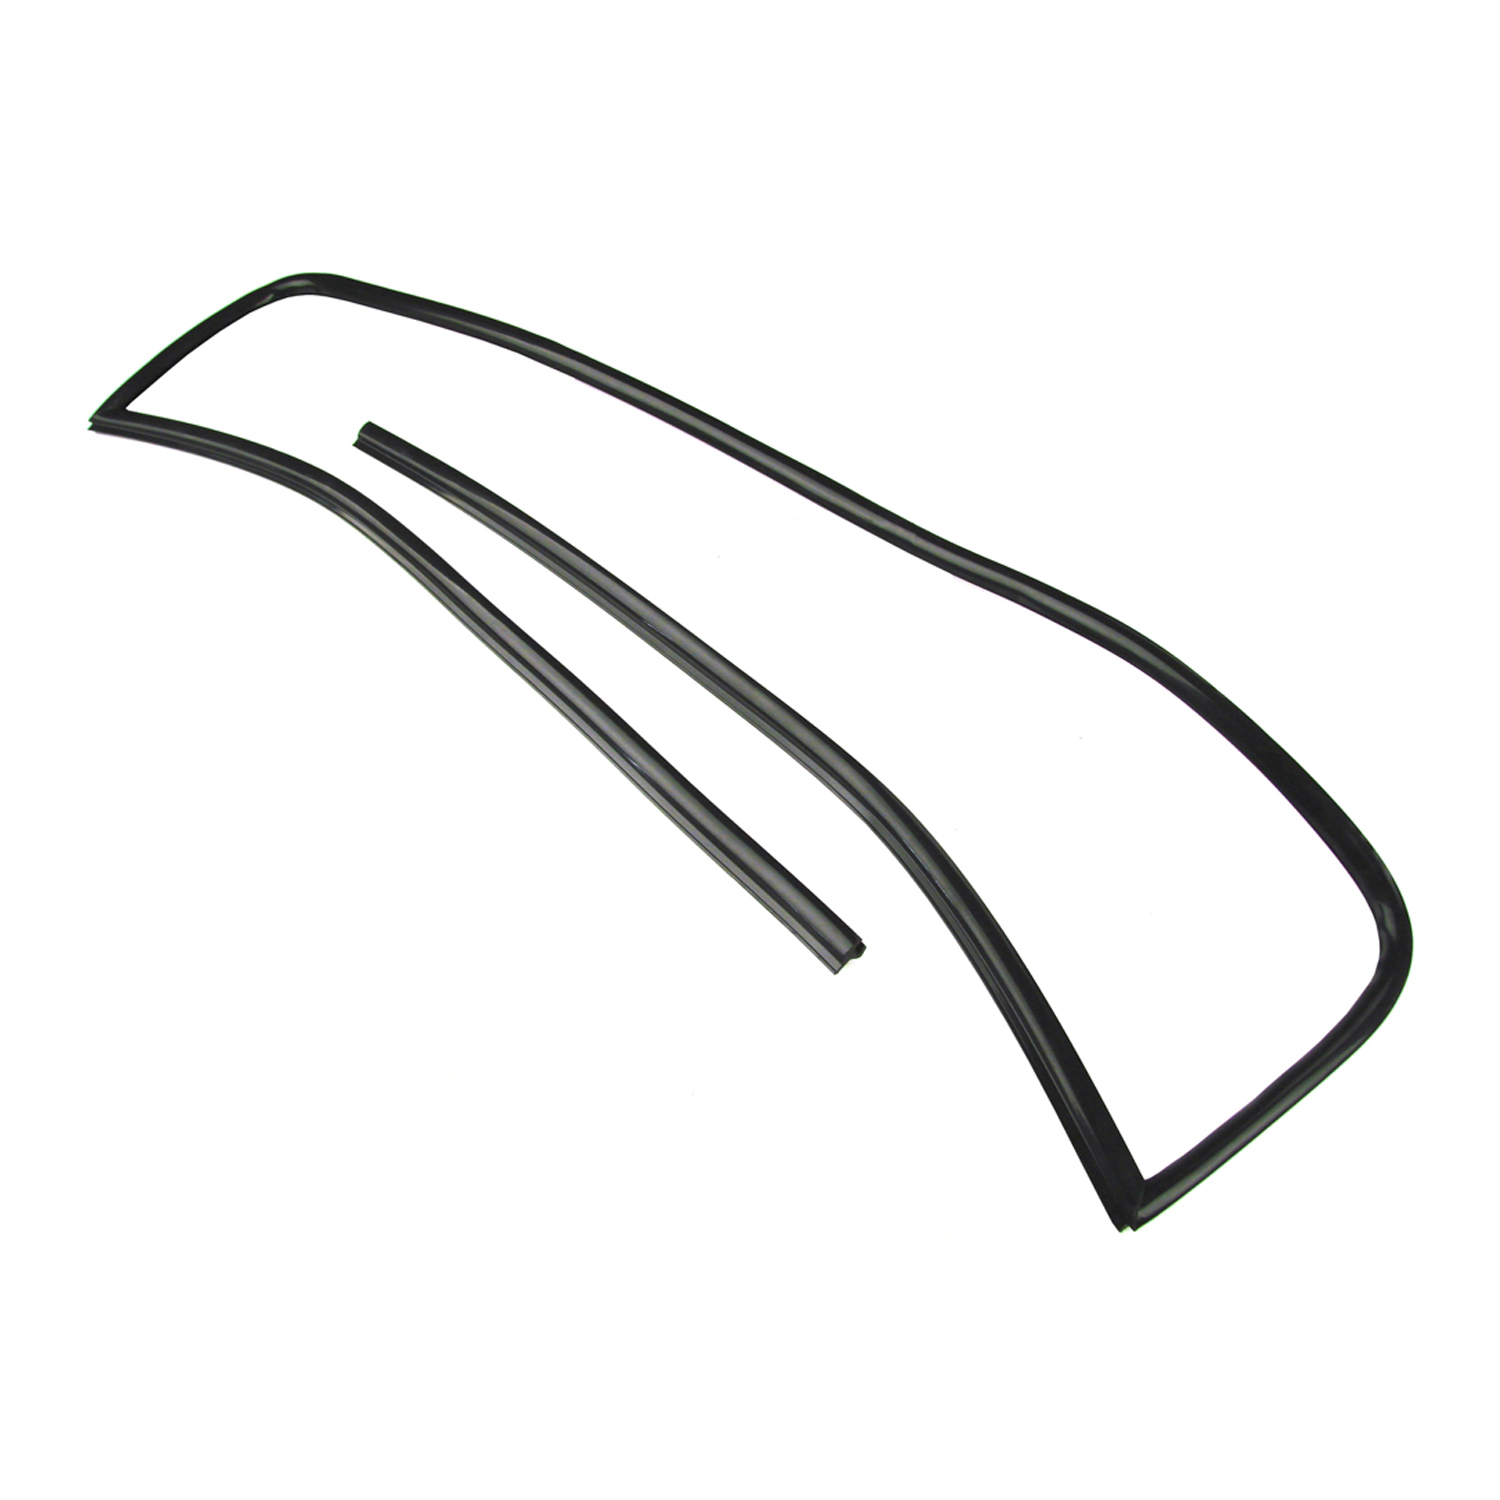 2001 Chevrolet Camaro Windshield Seal, 93-02 GM F Body Coupe Without T-Top Option, Each-VWS 1967-M